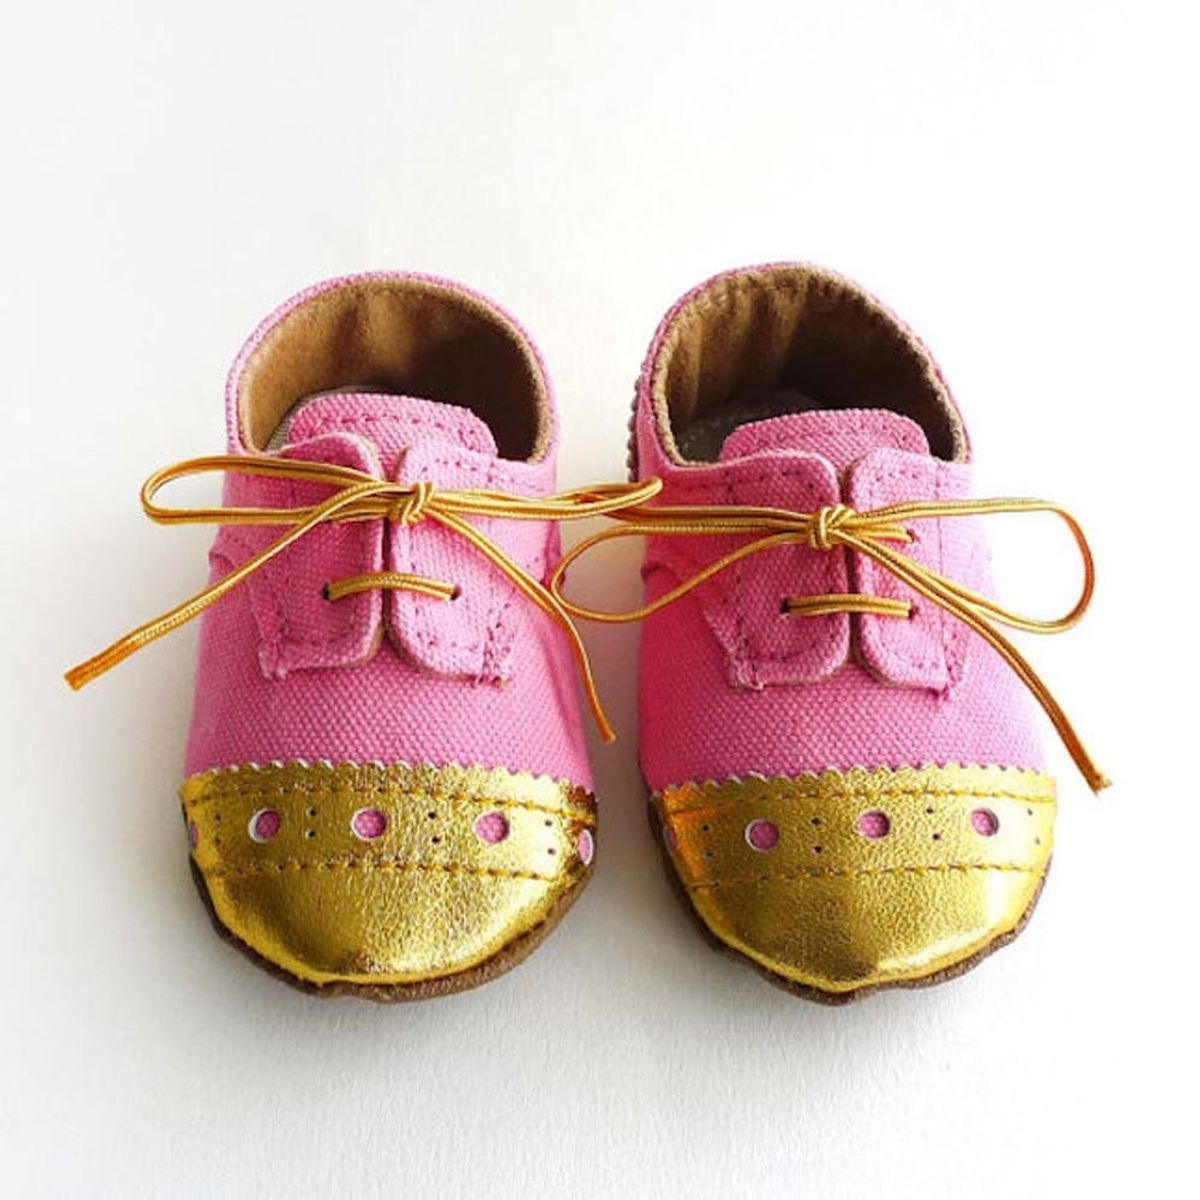 Little Kicks: 21 Sweet Shoes for the Teeniest Toes